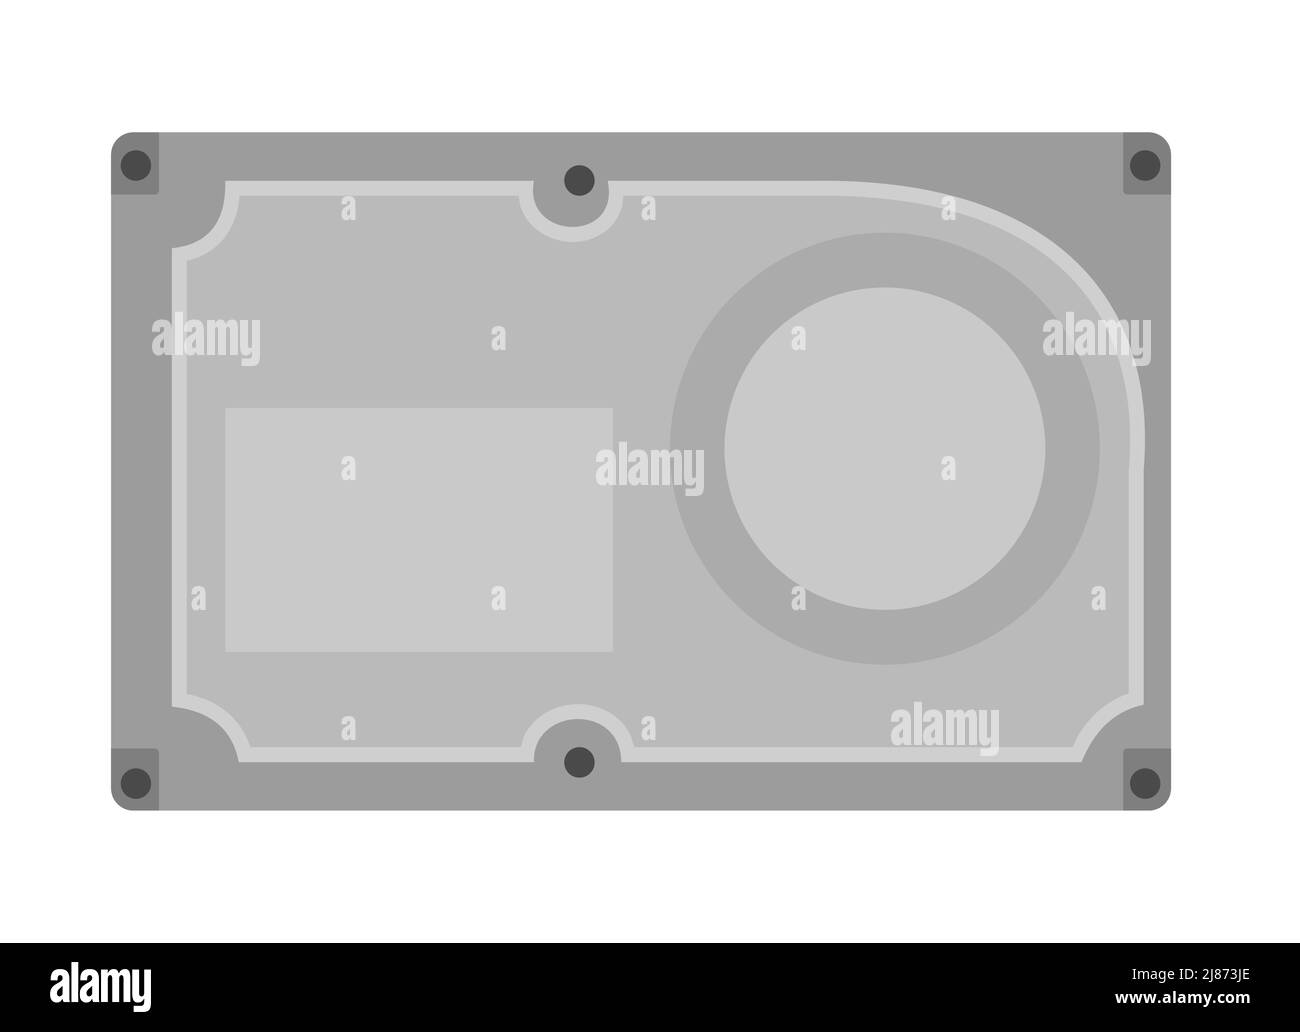 Hard disk drive. Analog HDD. Spare part for personal computer. Isolated on white background. PC or laptop accessories. Vector. Stock Vector